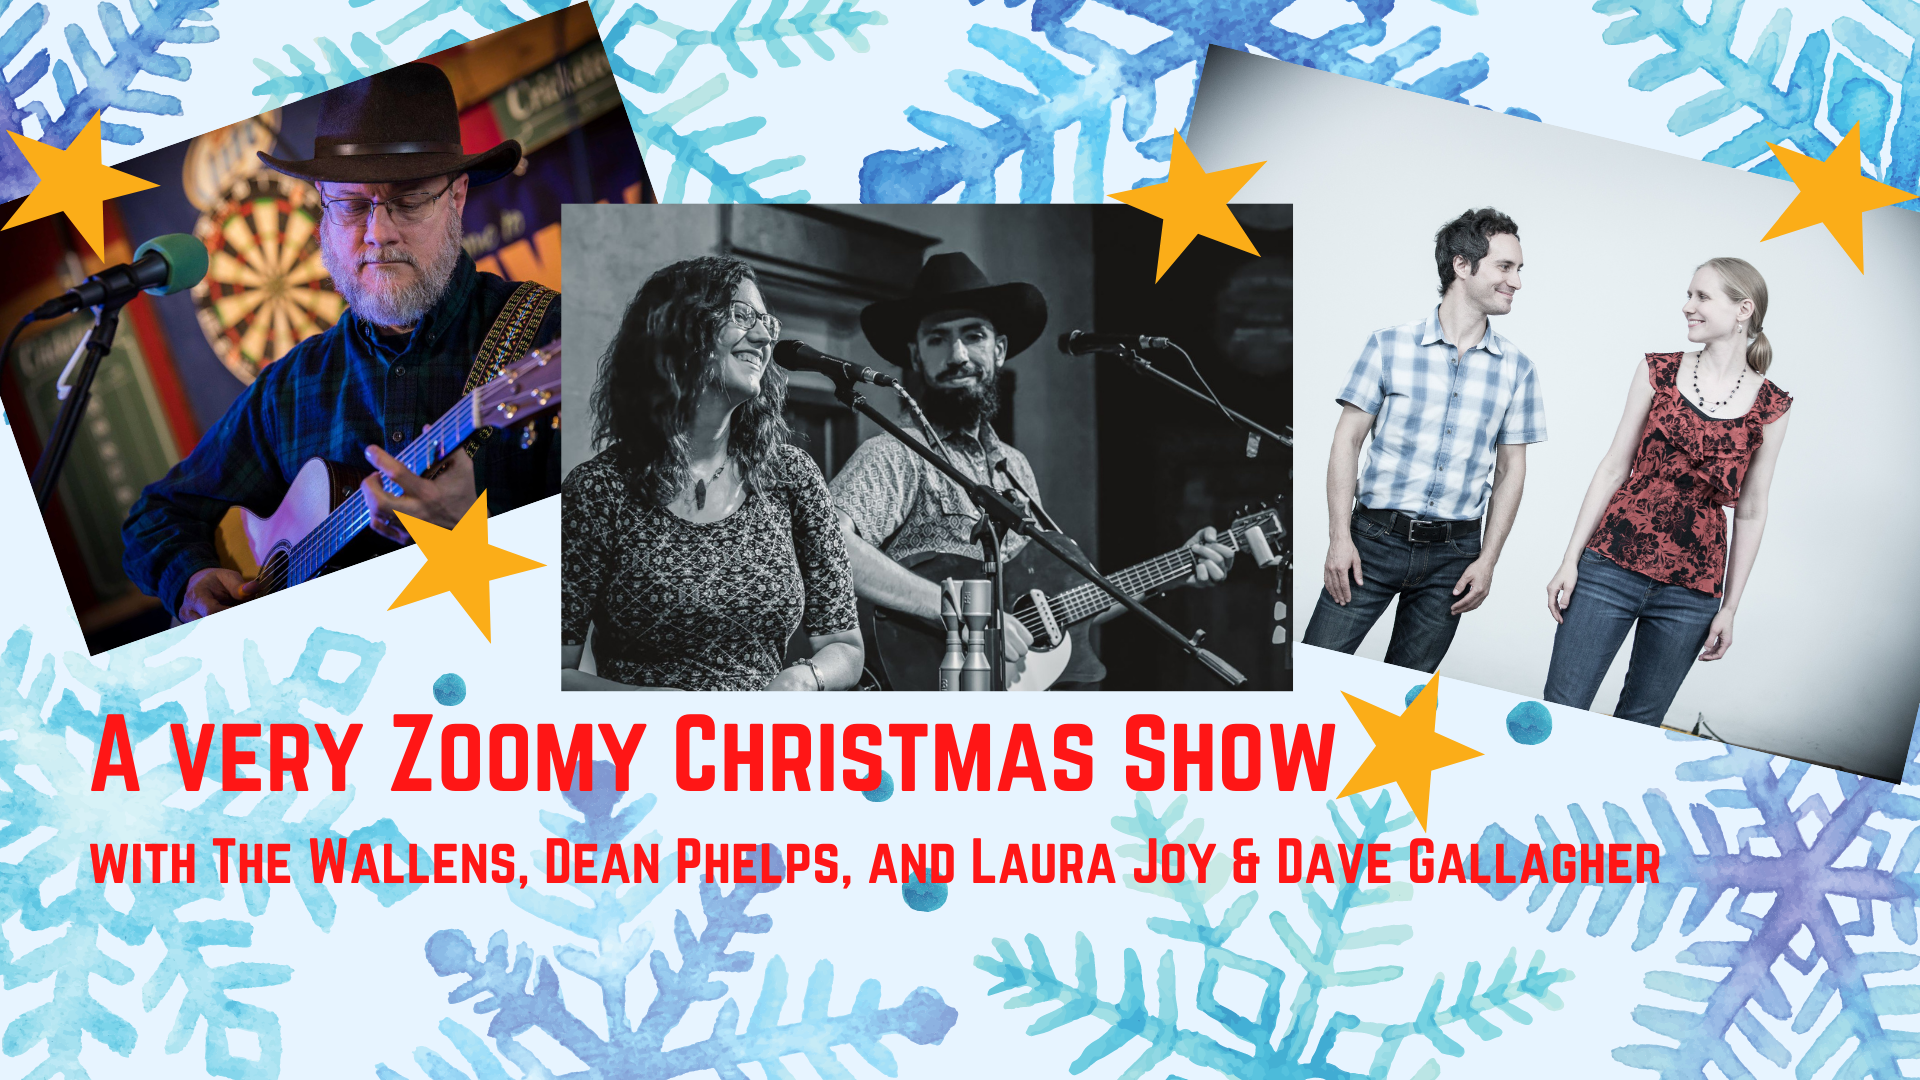 A Very Zoomy Christmas Show with The Wallens, Dean Phelps, Laura Joy & Dave Gallagher